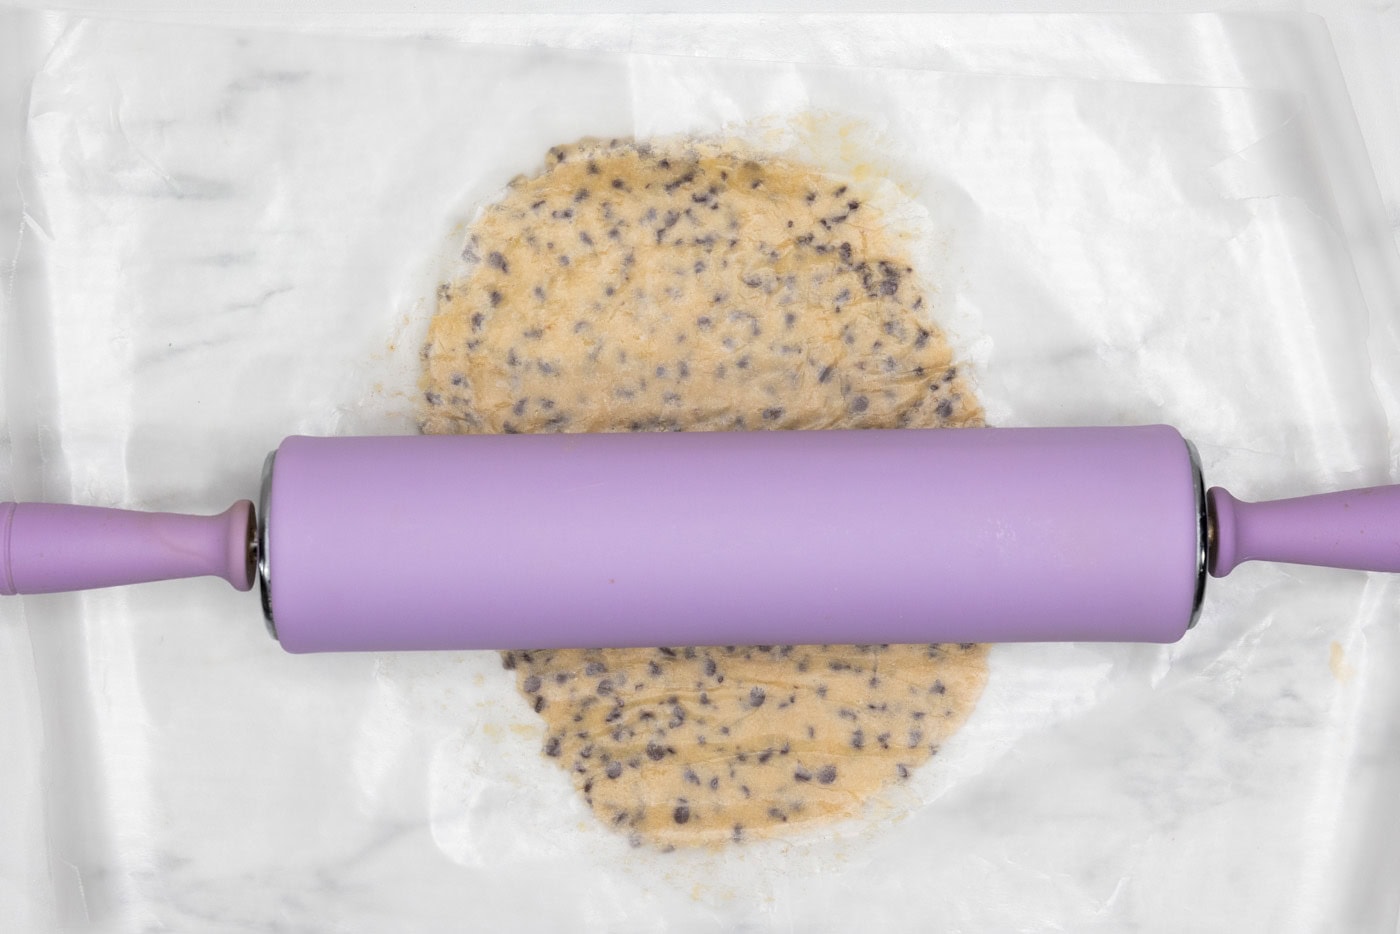 rolling pin flattening cookie dough ball between parchment paper